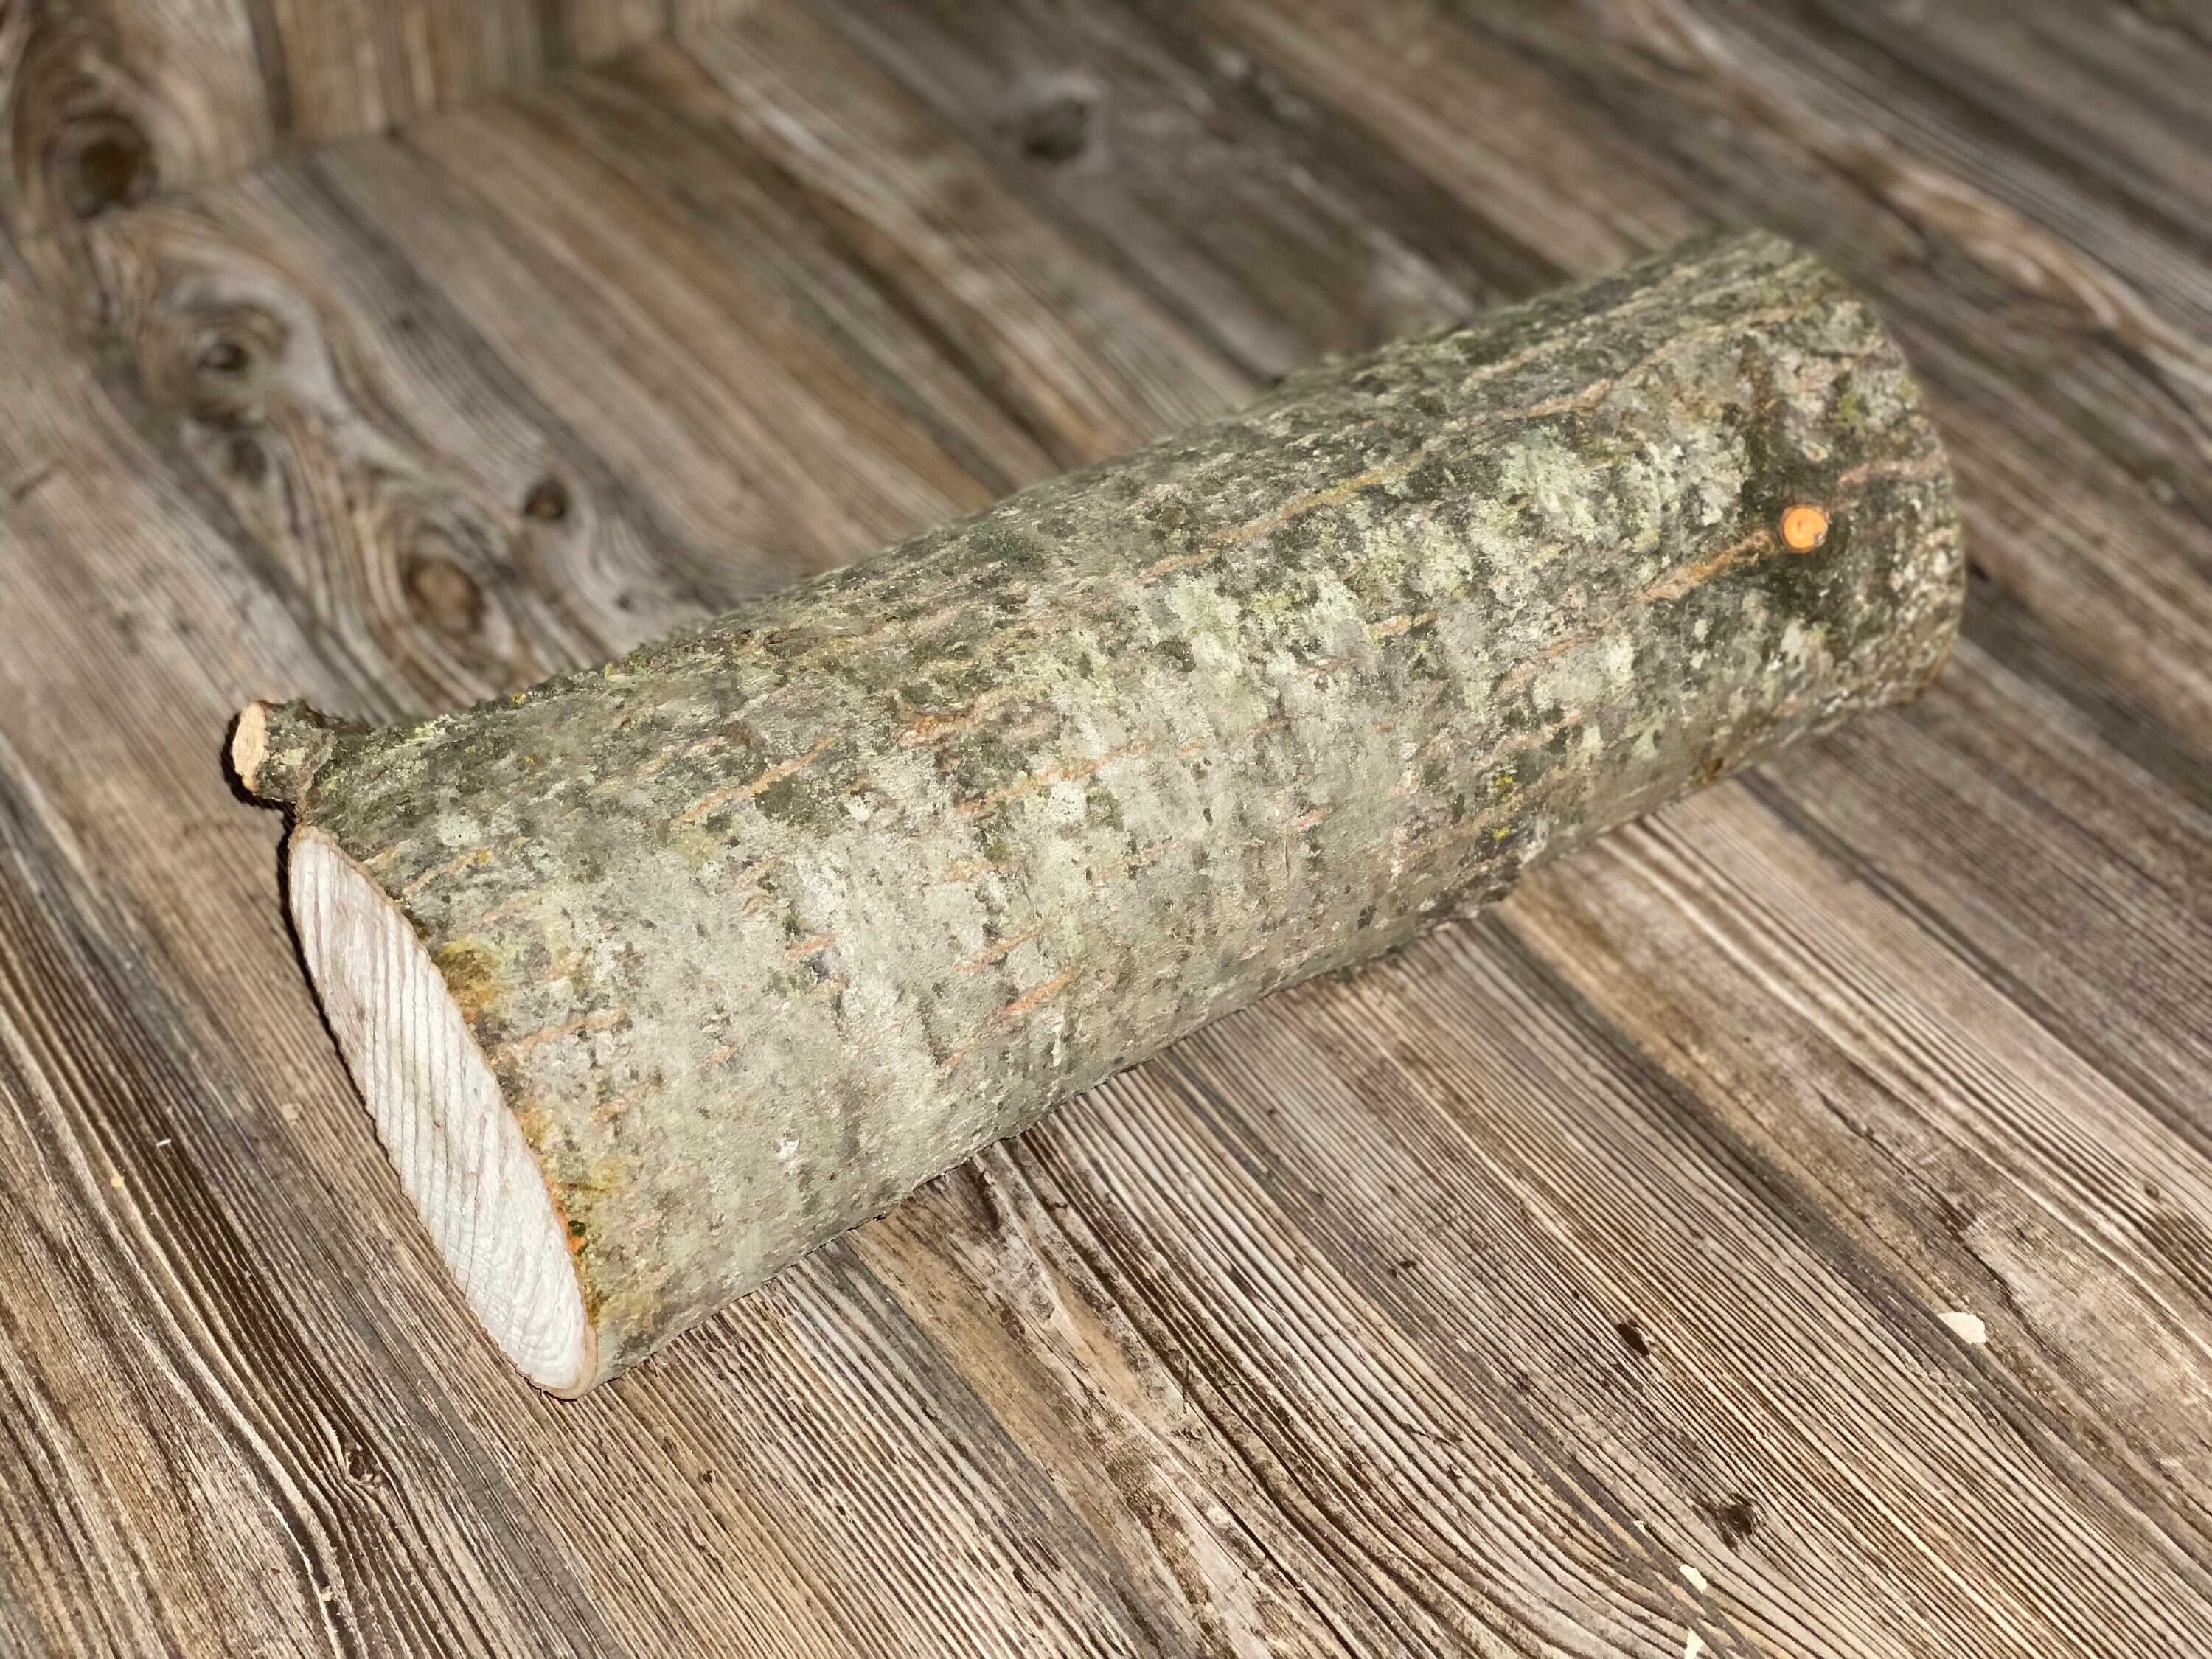 Aspen Log, Popple, About 16 Inches Long by 5 Inches in Diameter